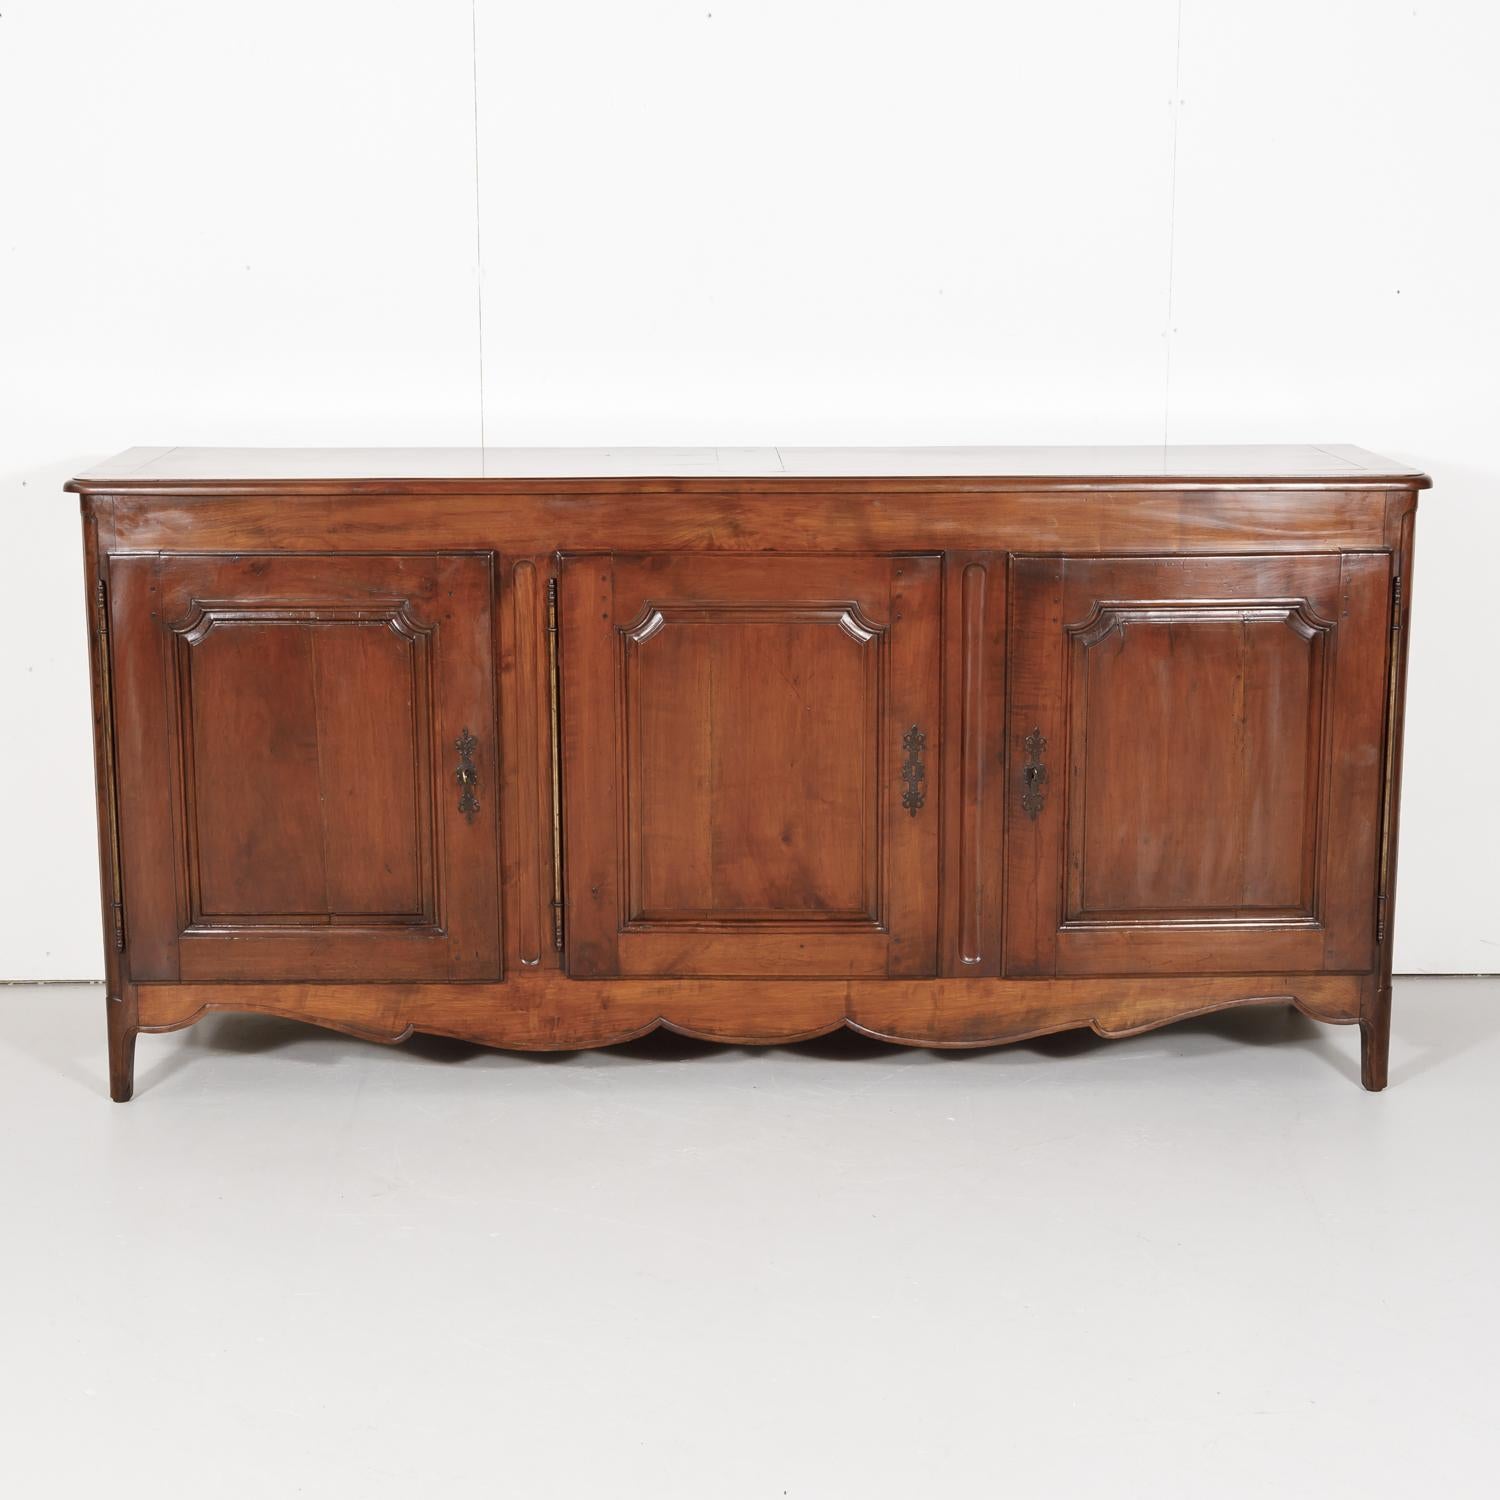 An 18th century Louis XV - Louis XVI Transition period solid cherry enfilade buffet handcrafted by skilled artisans from Toulouse during the French Transition period (1750-1775), having three panel doors that open to reveal plenty of storage. The